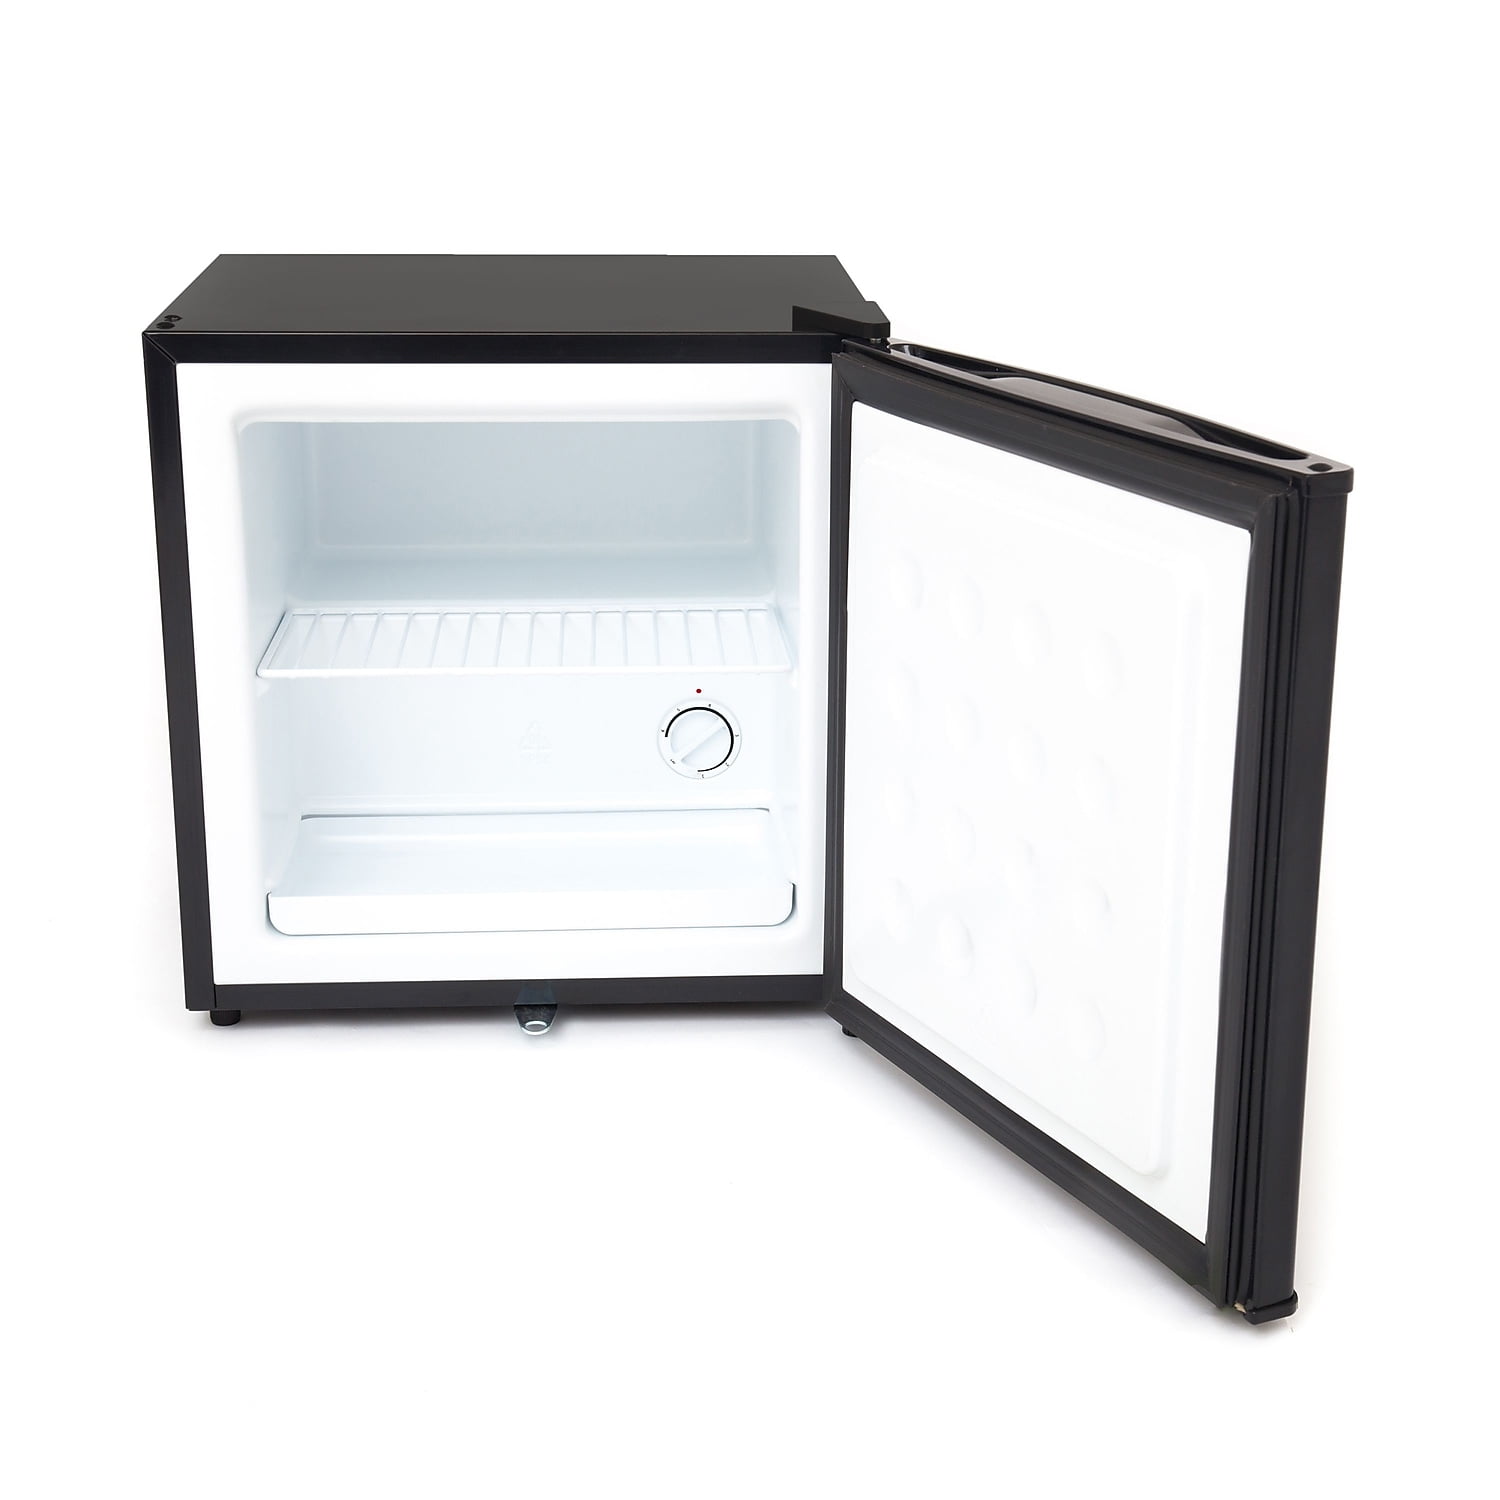 Whynter Compact Upright Freezer With Lock, Solid Door, 1.1 Cu. Ft.,  Stainless Steel/Black